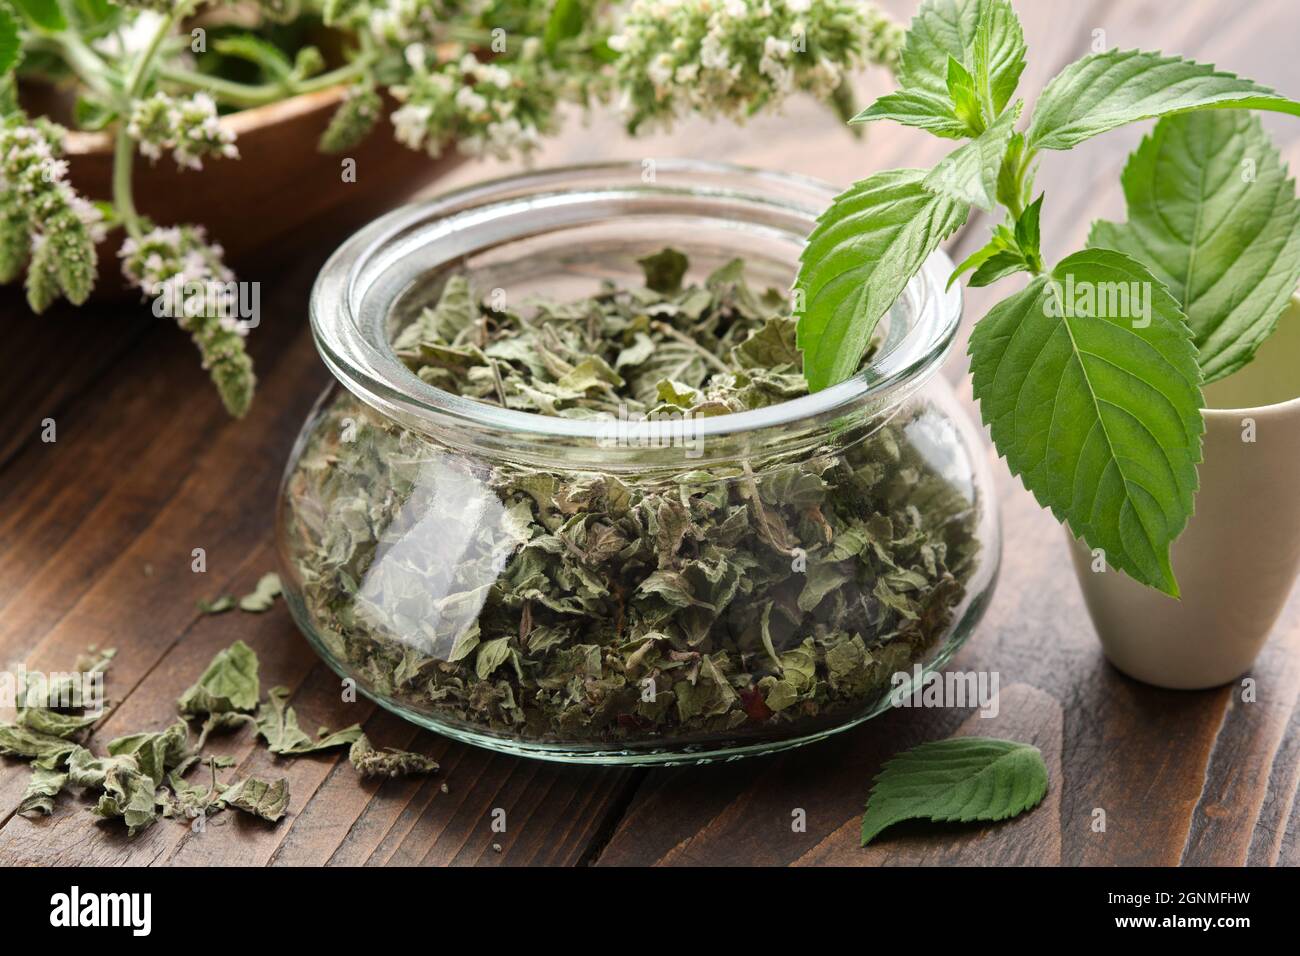 Glass jar of dried mint leaves and blossom peppermint. Mortar of fresh spearmint leaves. Wooden bowl of blossom Mentha piperita medicinal plants on ba Stock Photo